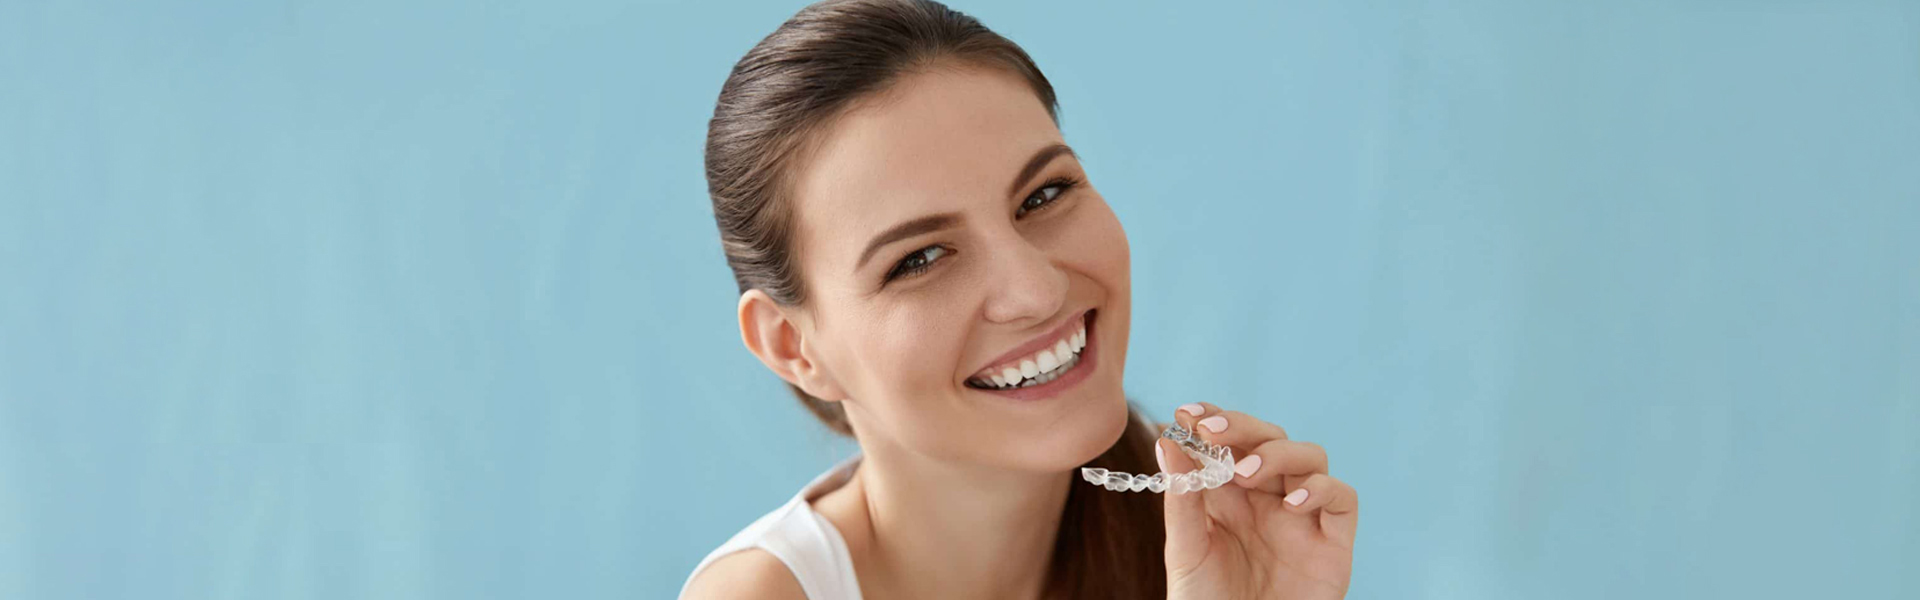 How Invisalign Treatment Works and Tips to Care for Them